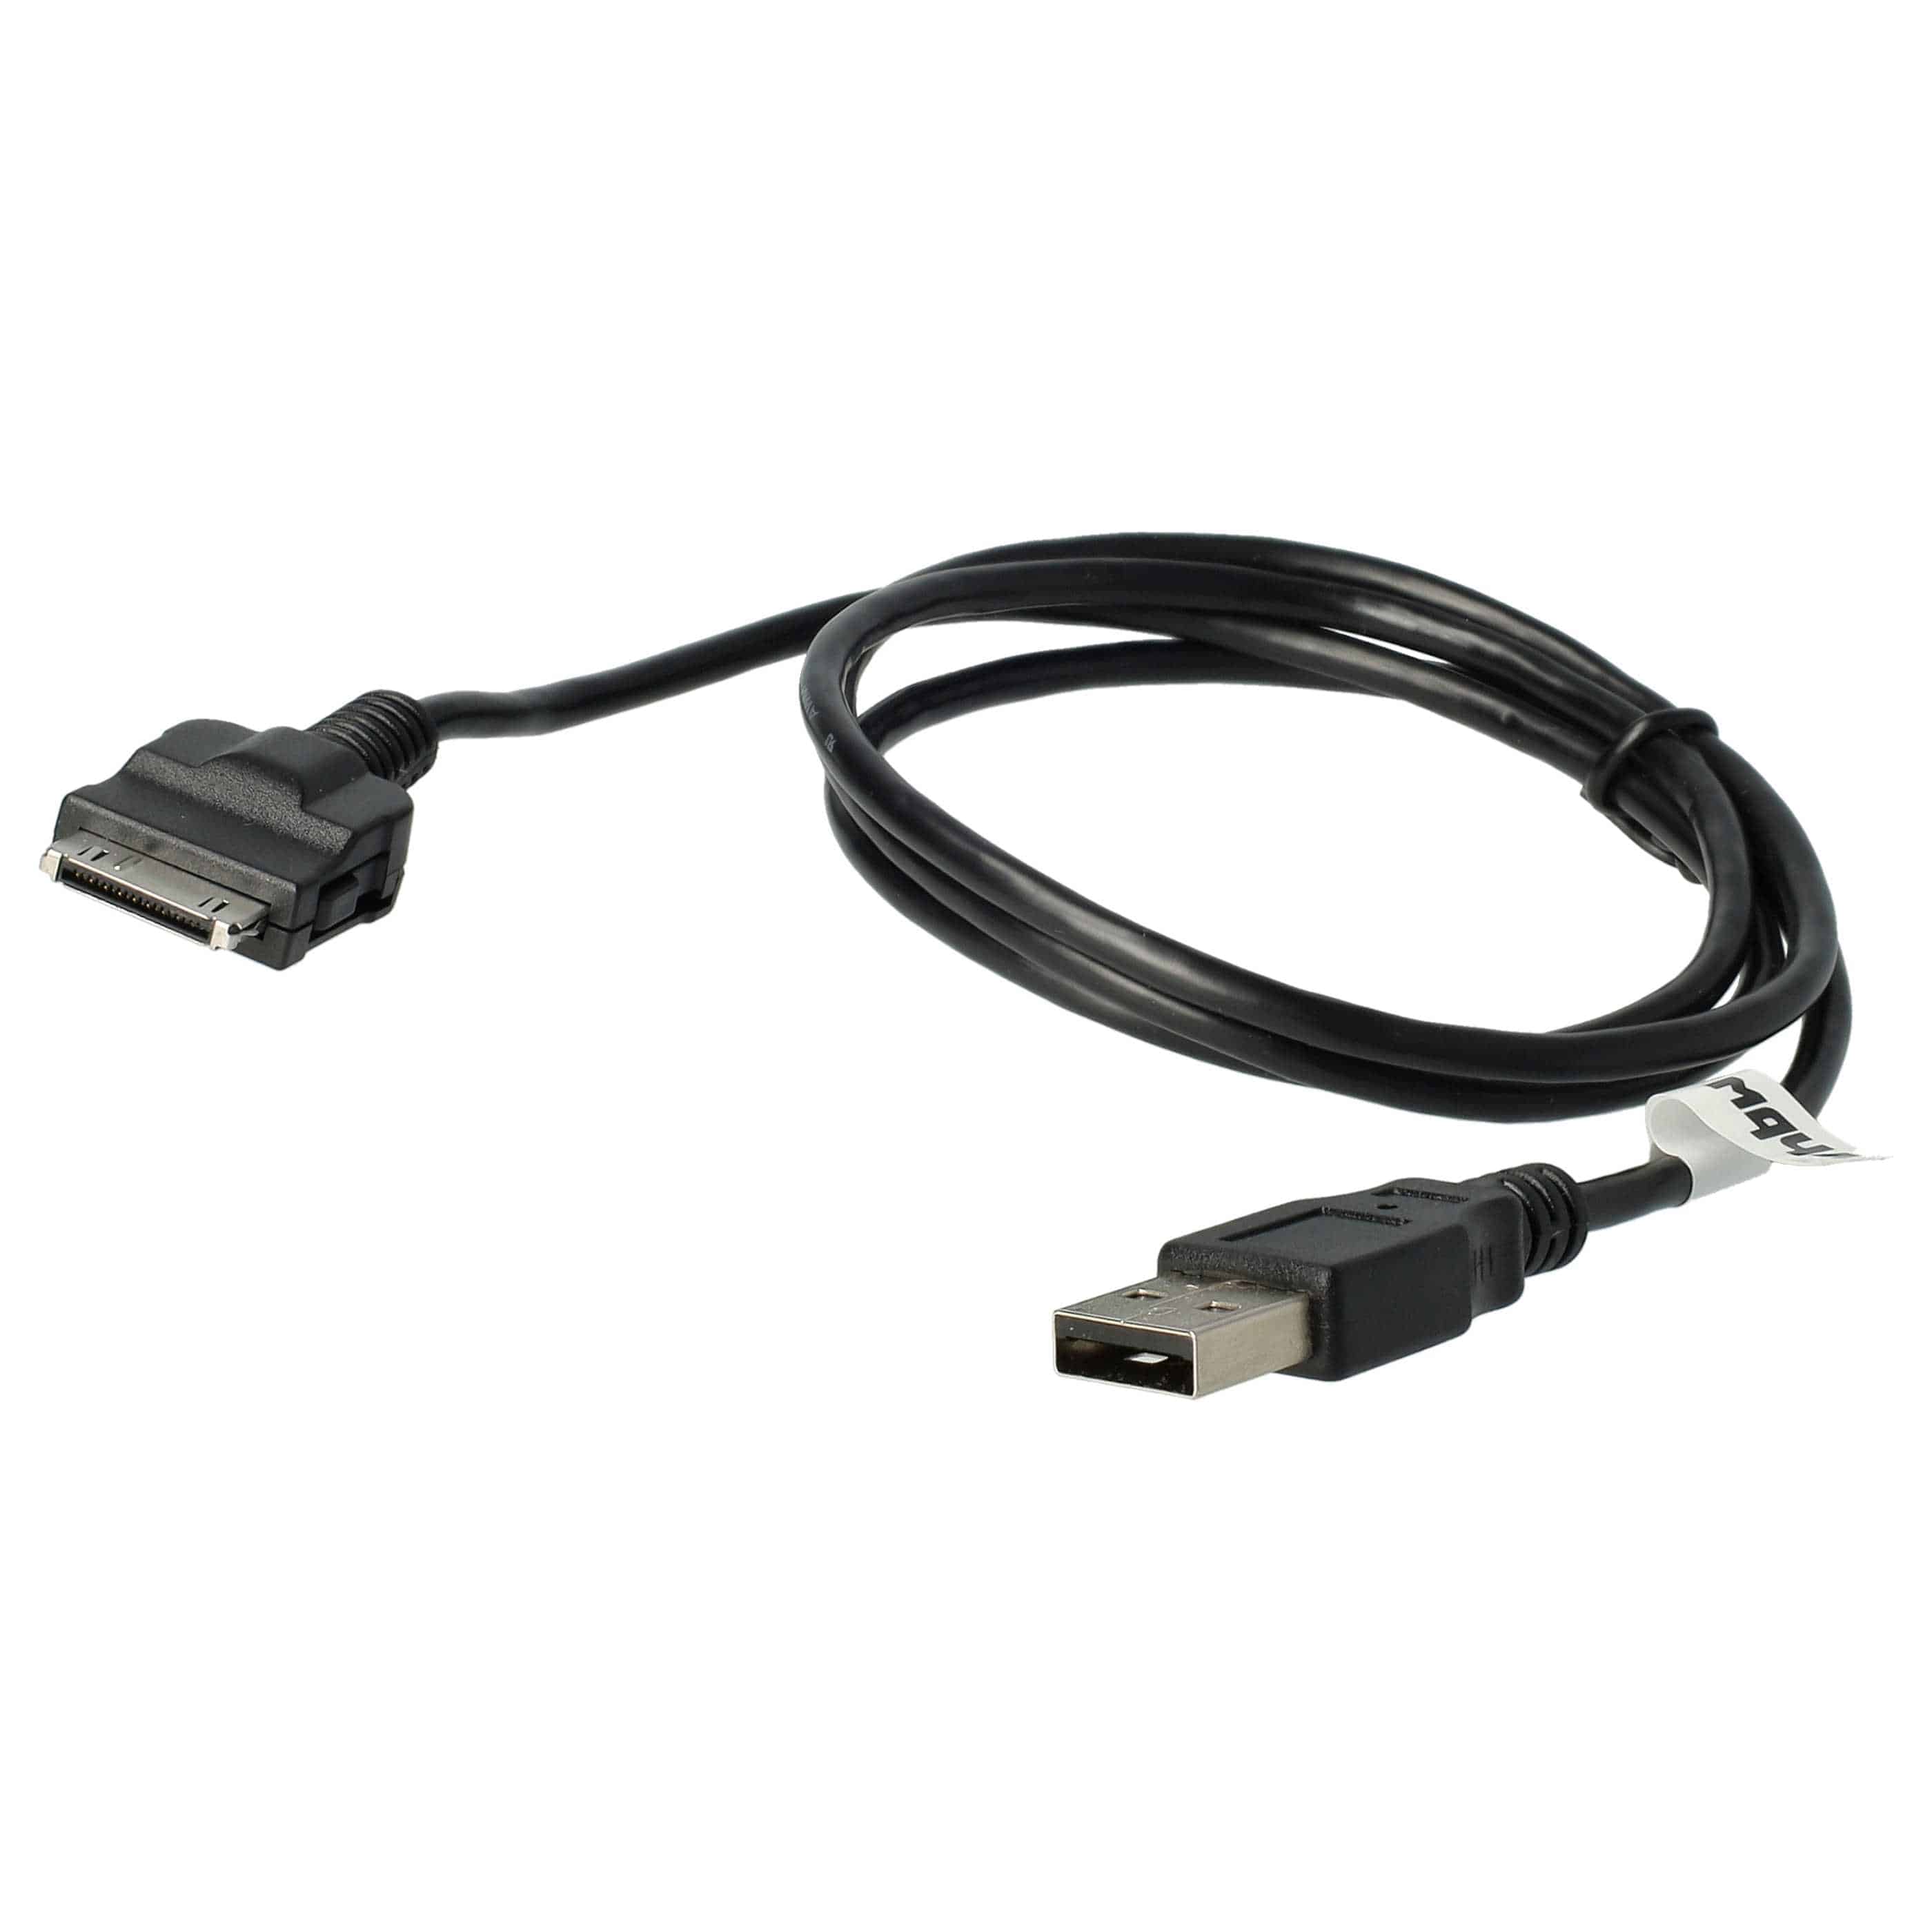 USB Data Cable suitable for Iriver H10 1GB etc., 100 cm